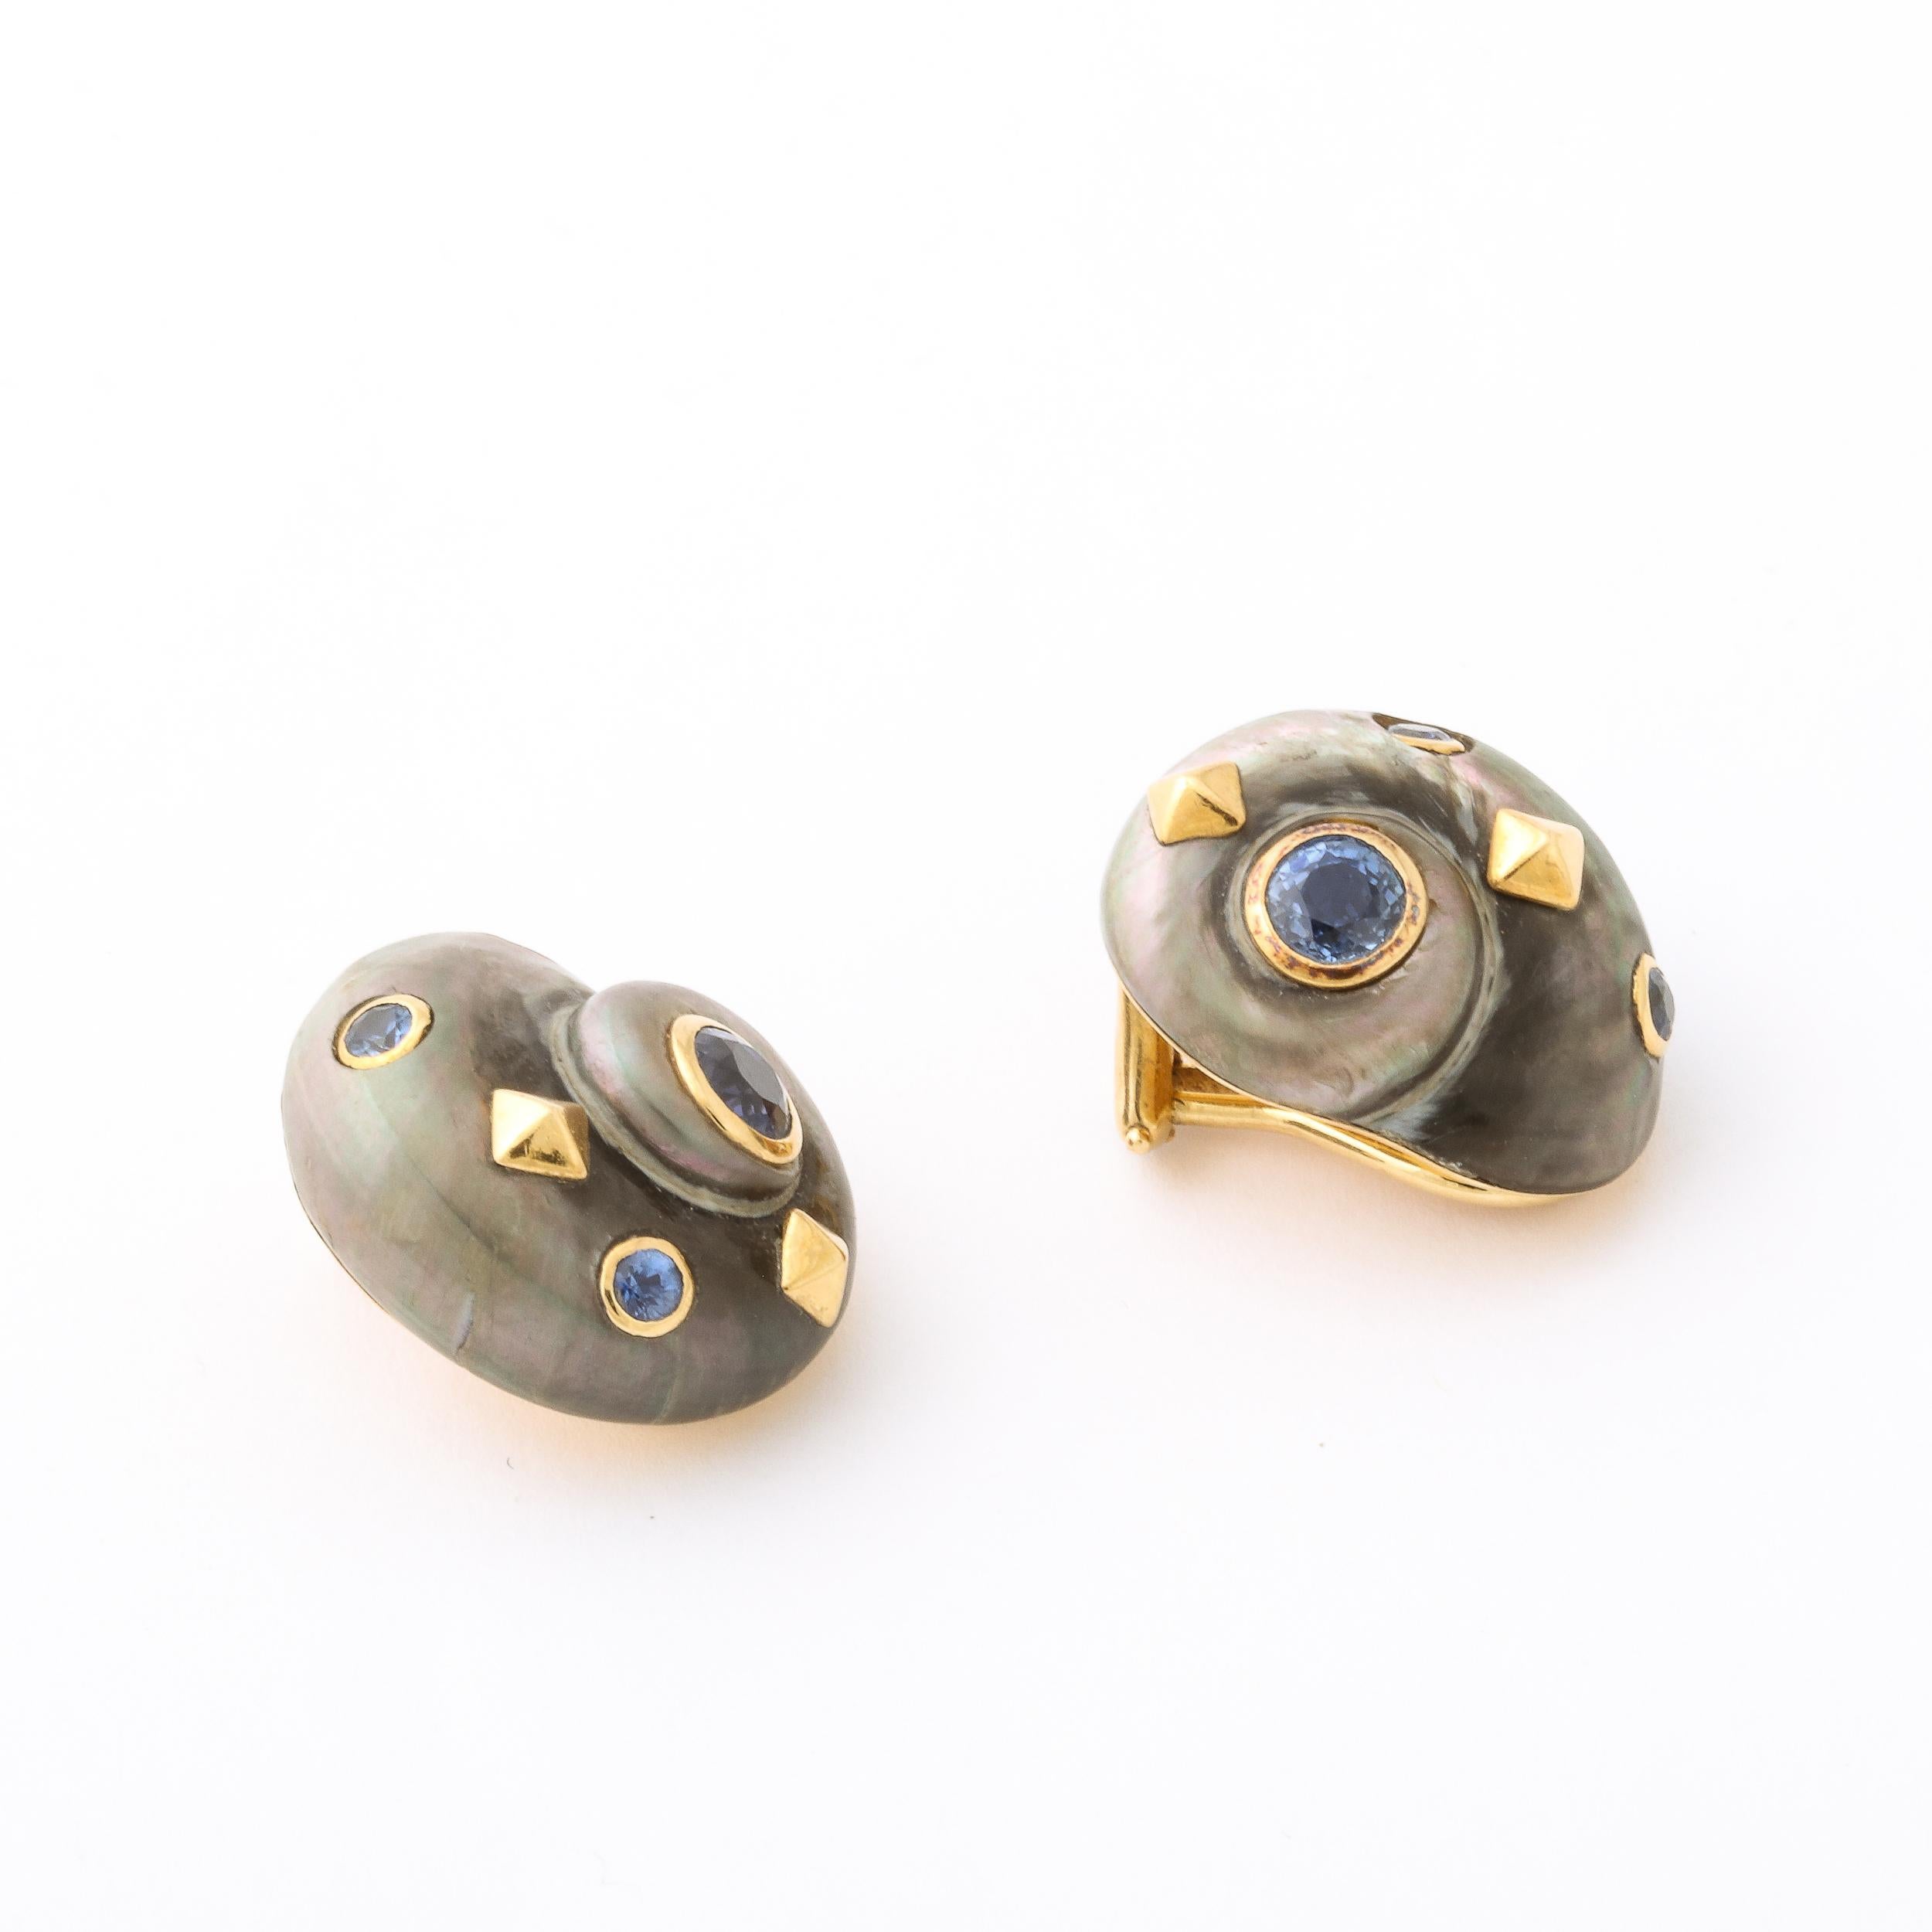 Iridescent Grey Shell Earrings Set in 18k Gold & Inlaid Blue Topaz by Trianon 5